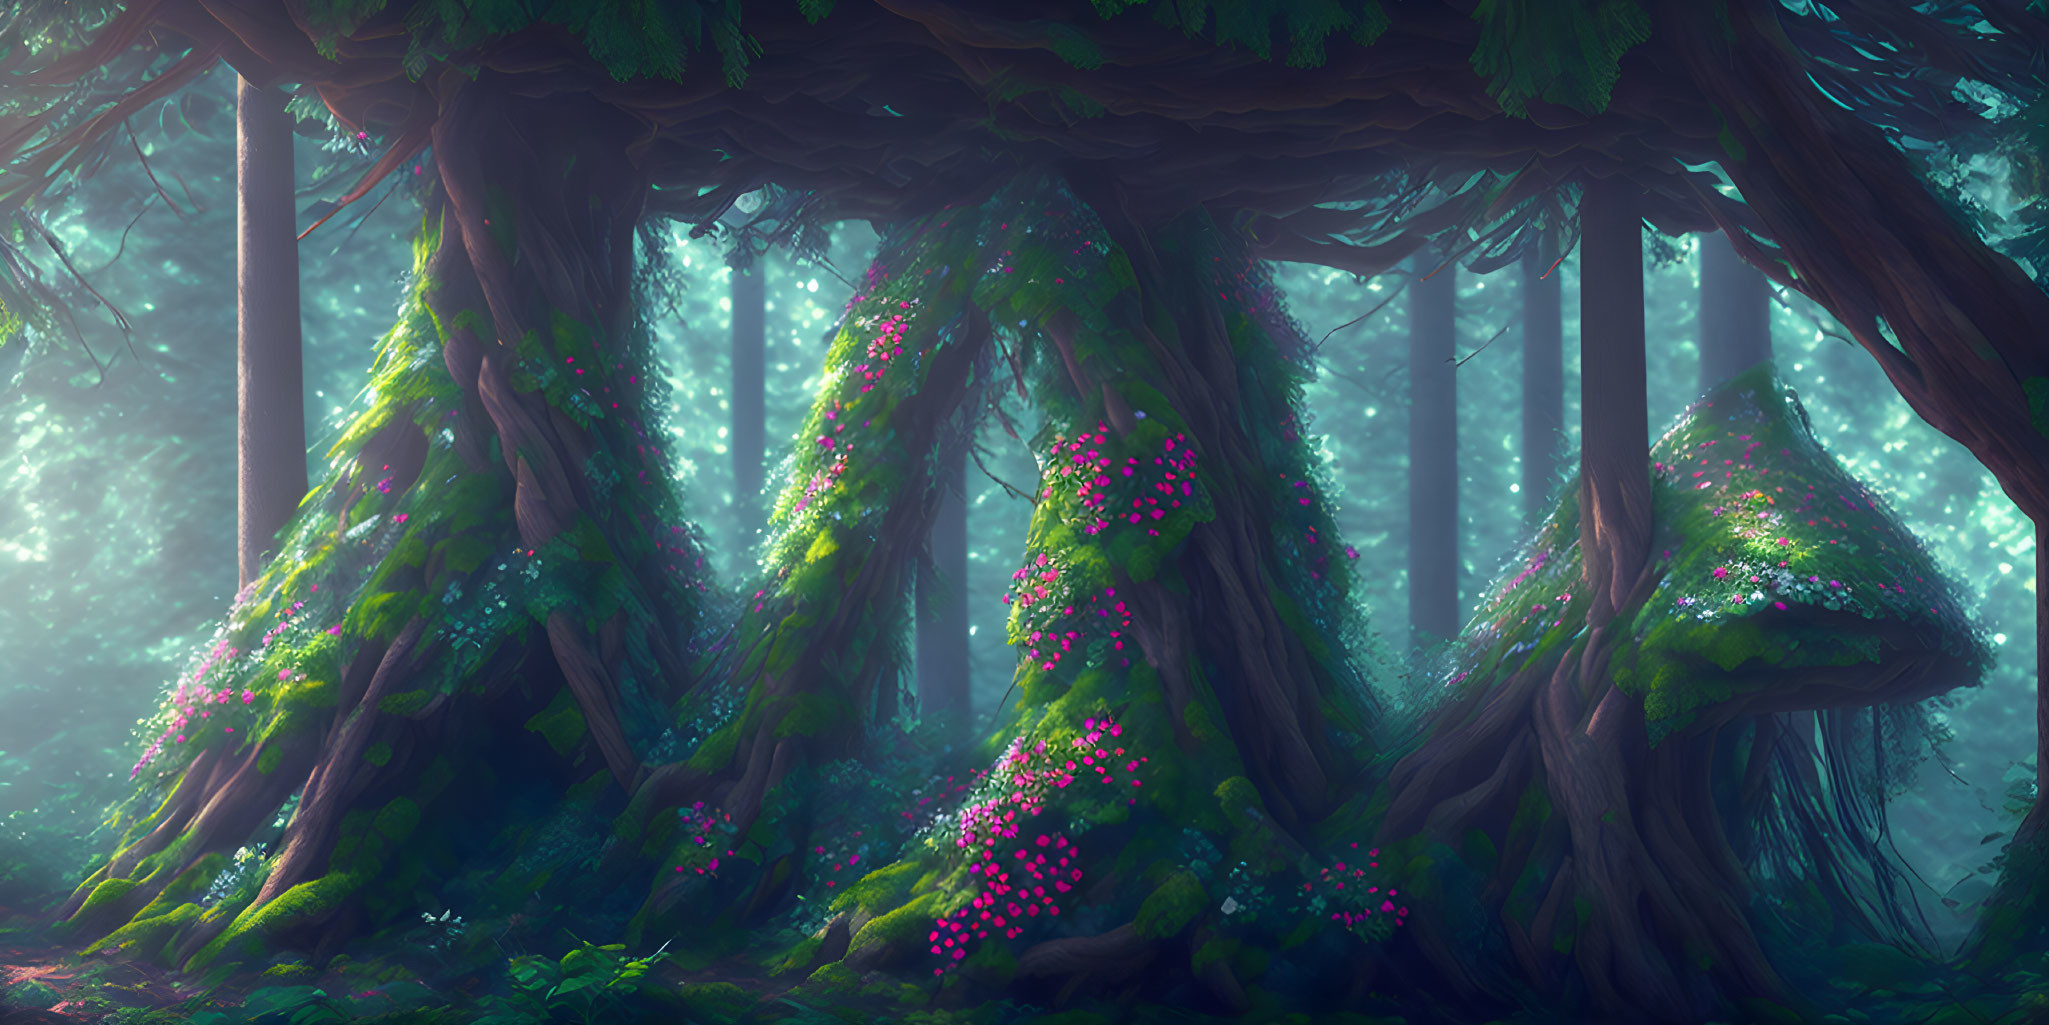 Moss-covered trees and pink flowers in mystical forest scene